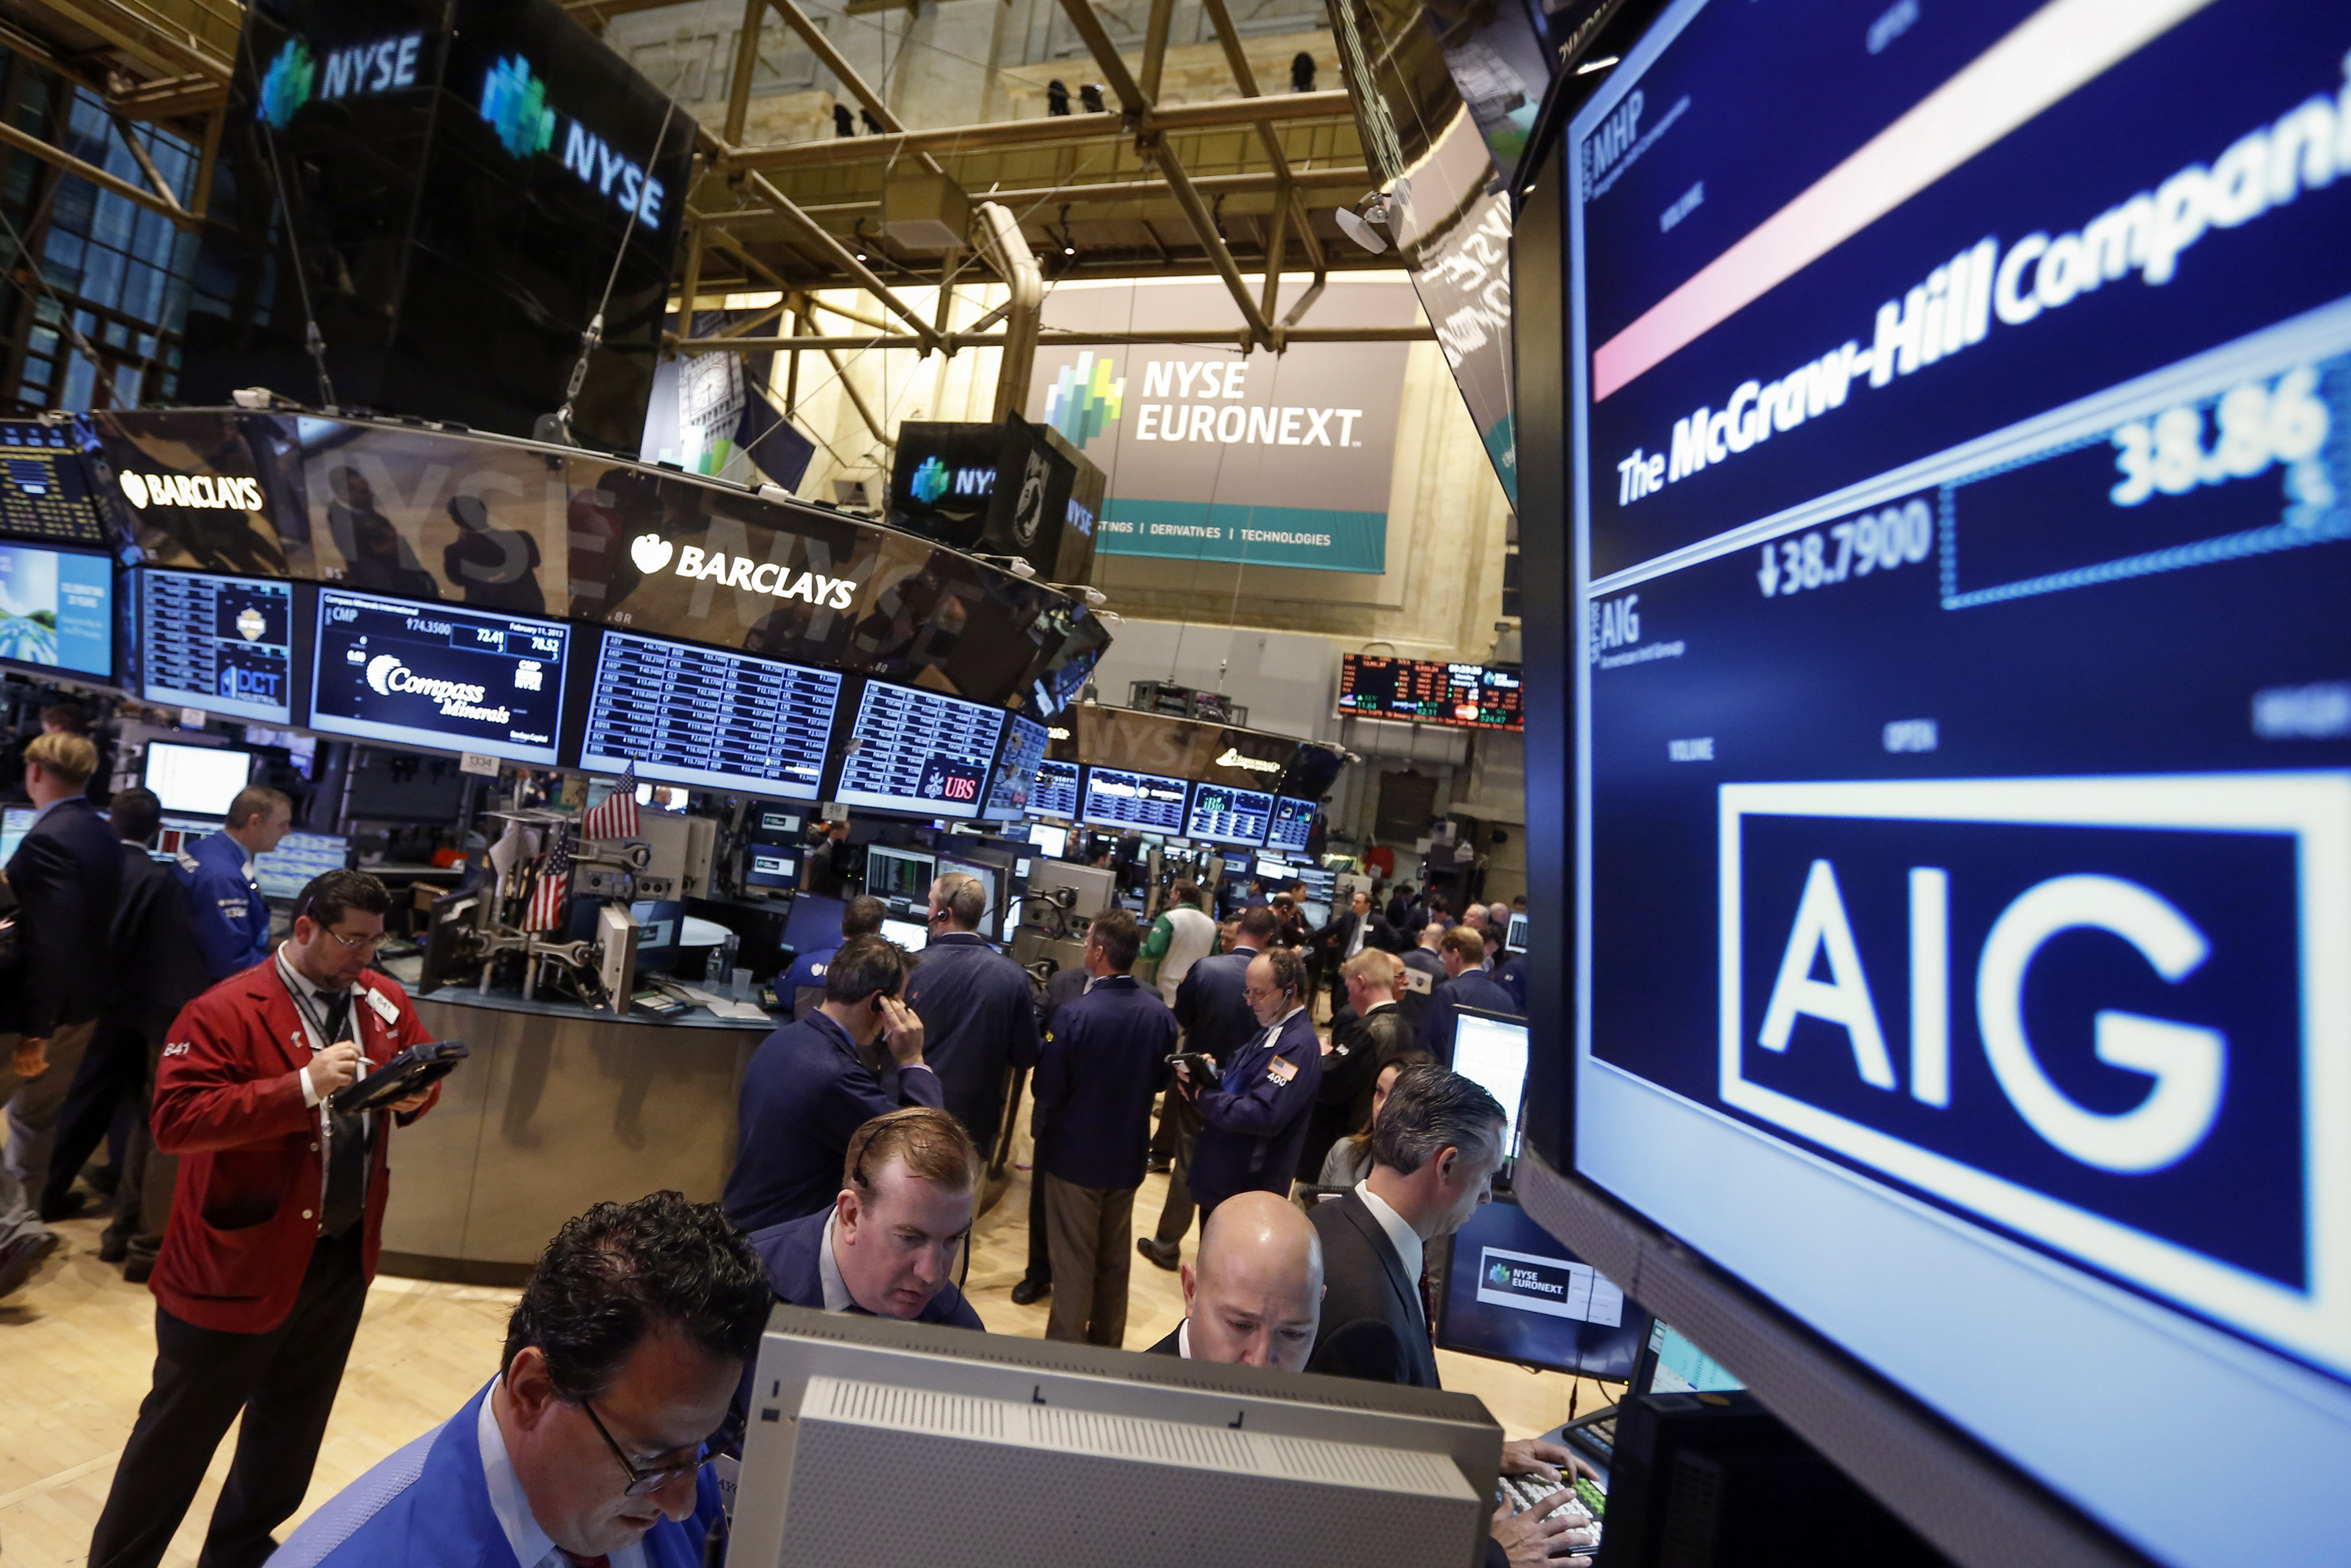 The American International Group, Inc. (AIG) stock ticker is seen on a monitor as traders work on the floor of the New York Stock Exchange